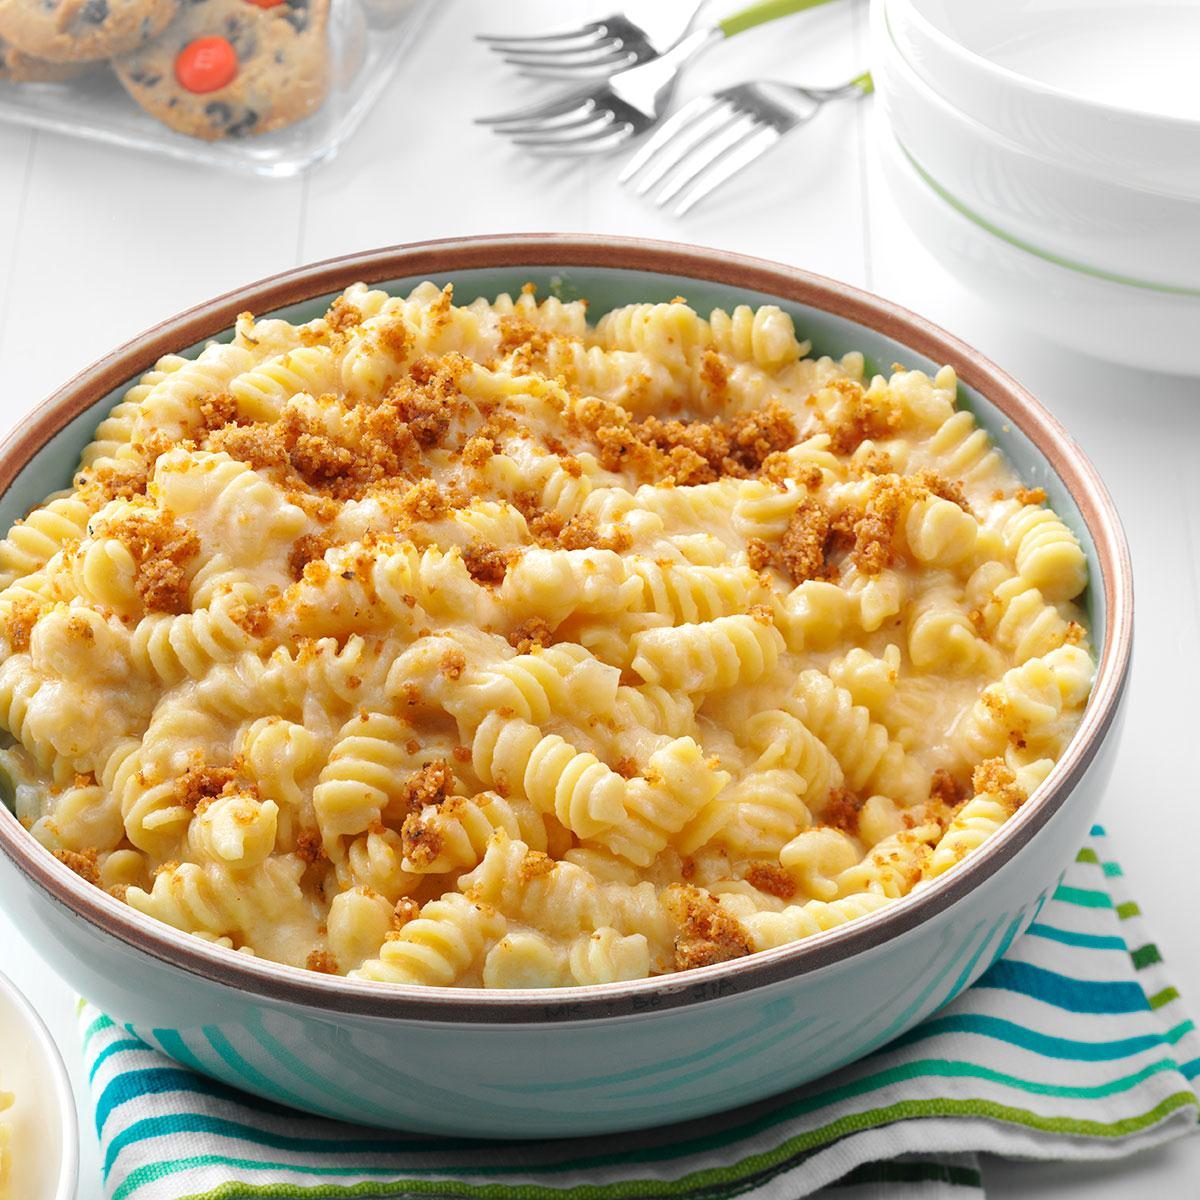 Inspired by: Boston Market’s Mac & Cheese